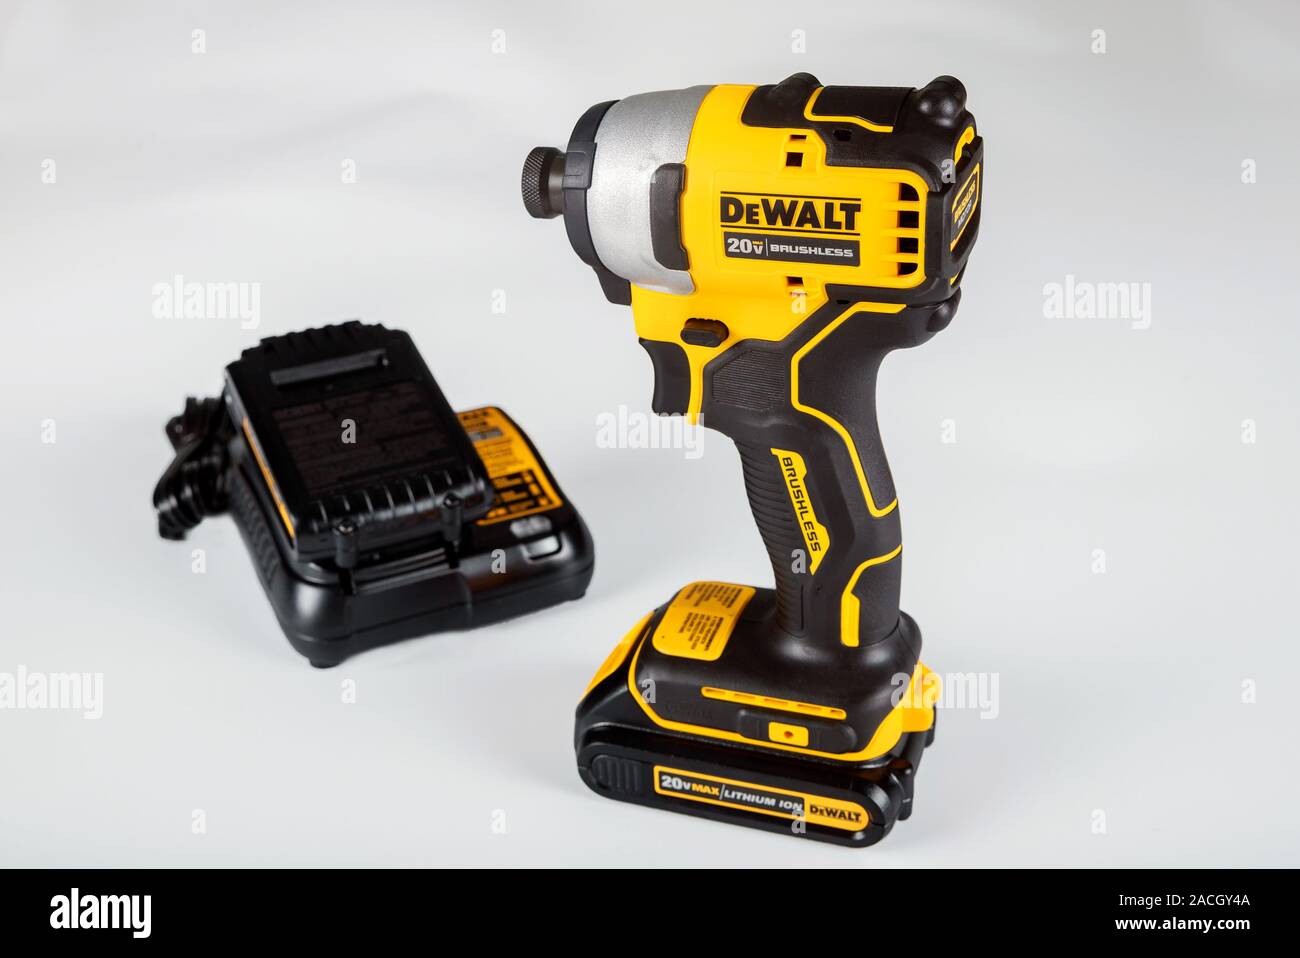 New York NY DEC 02 2019: DeWalt cordless Power Drill on a isolate white  background Stock Photo - Alamy